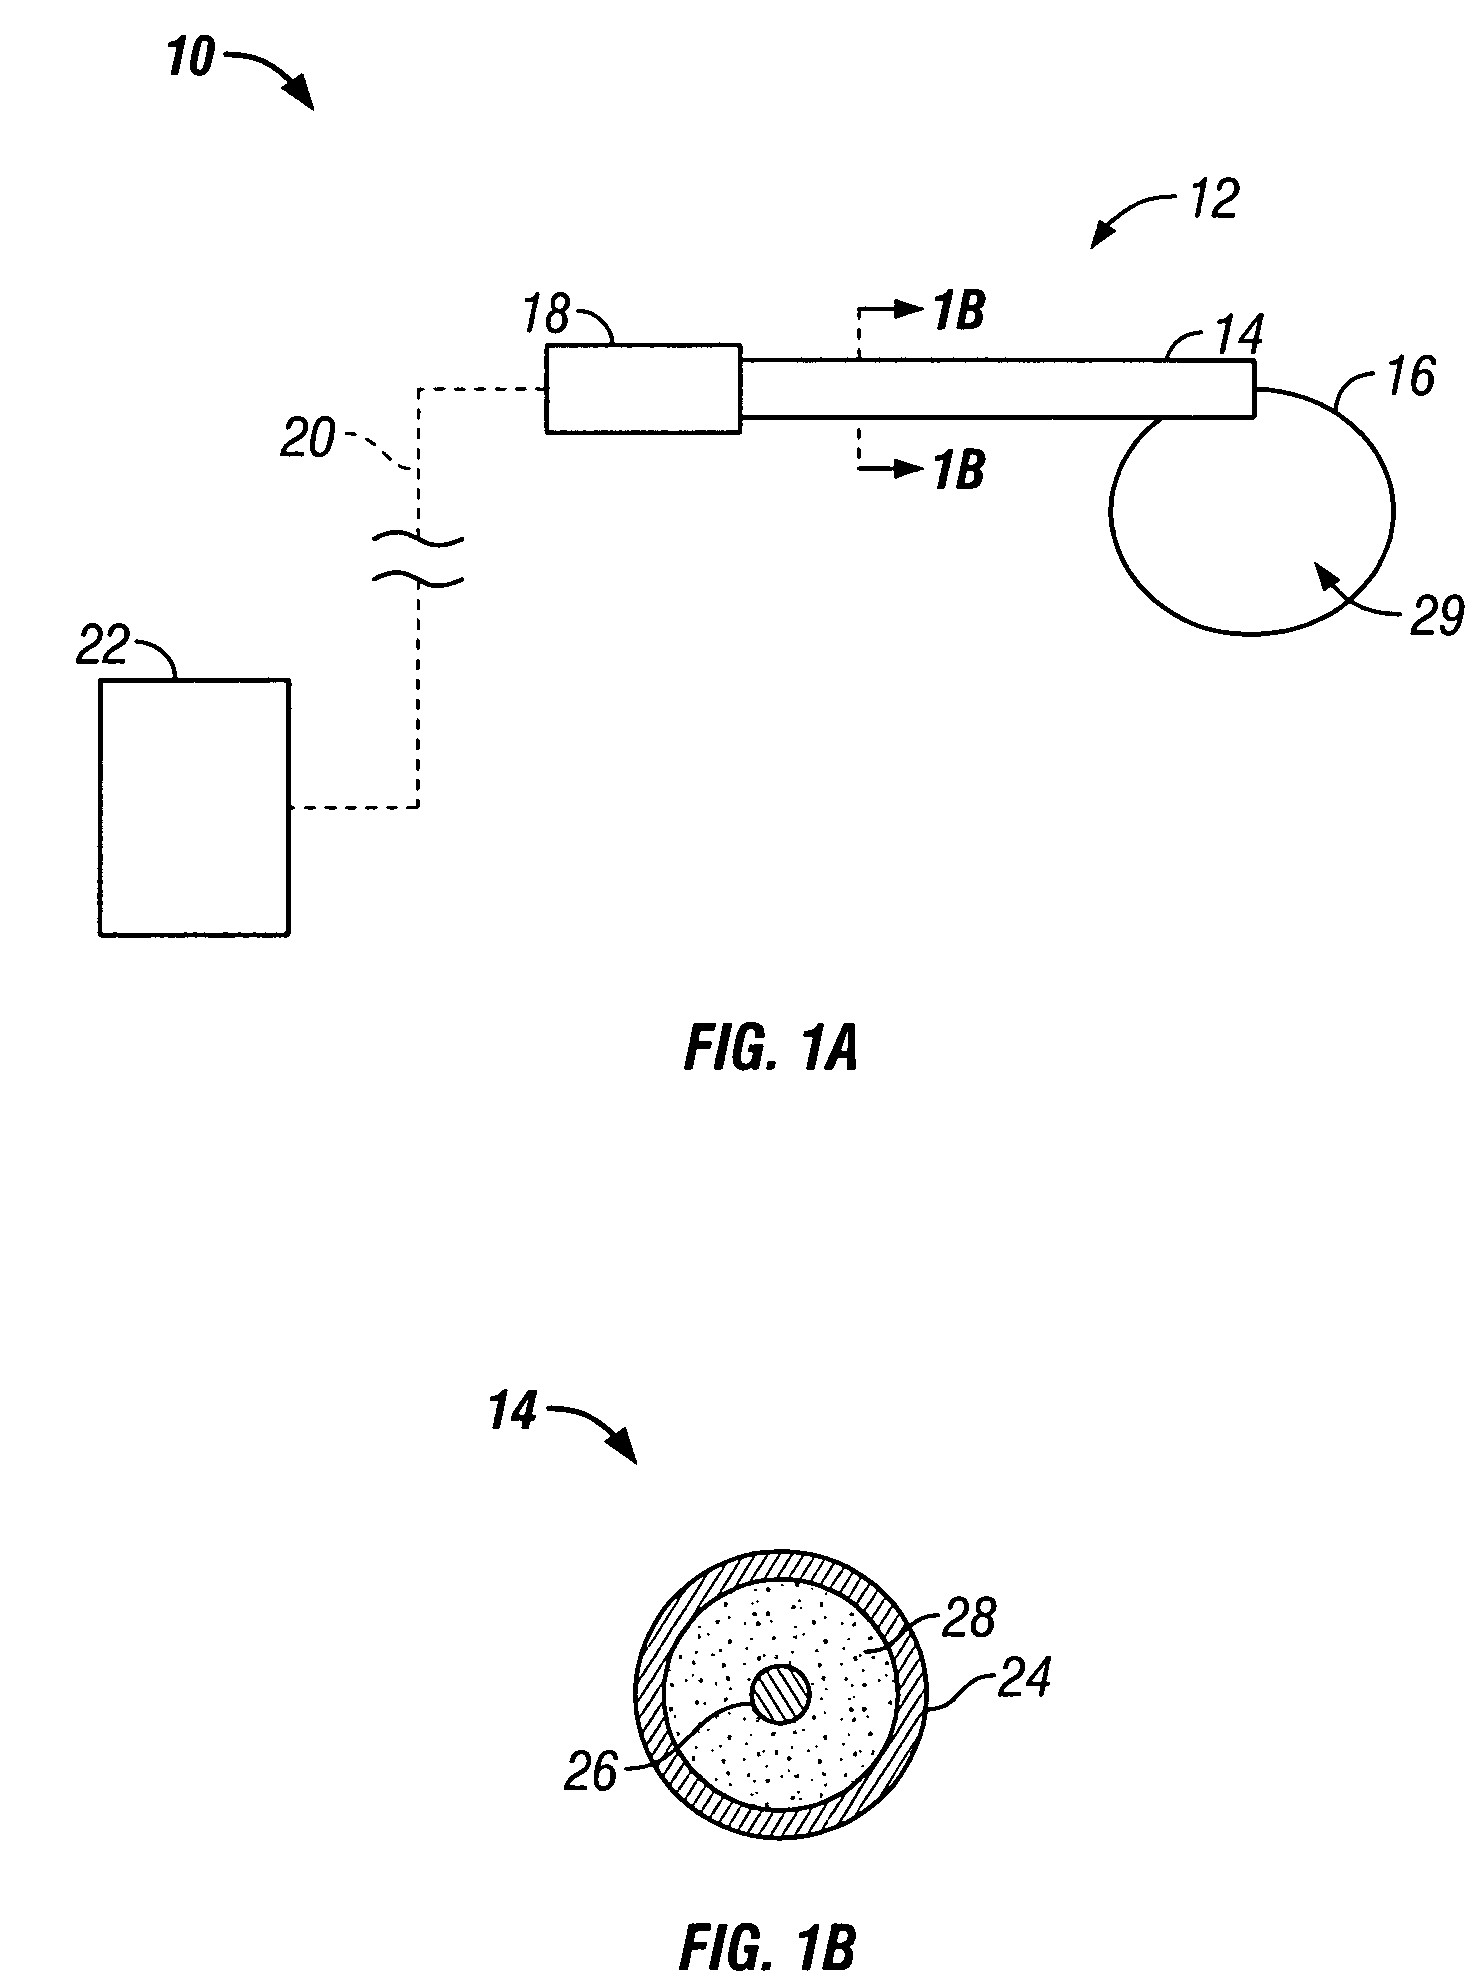 Microwave antenna having a curved configuration